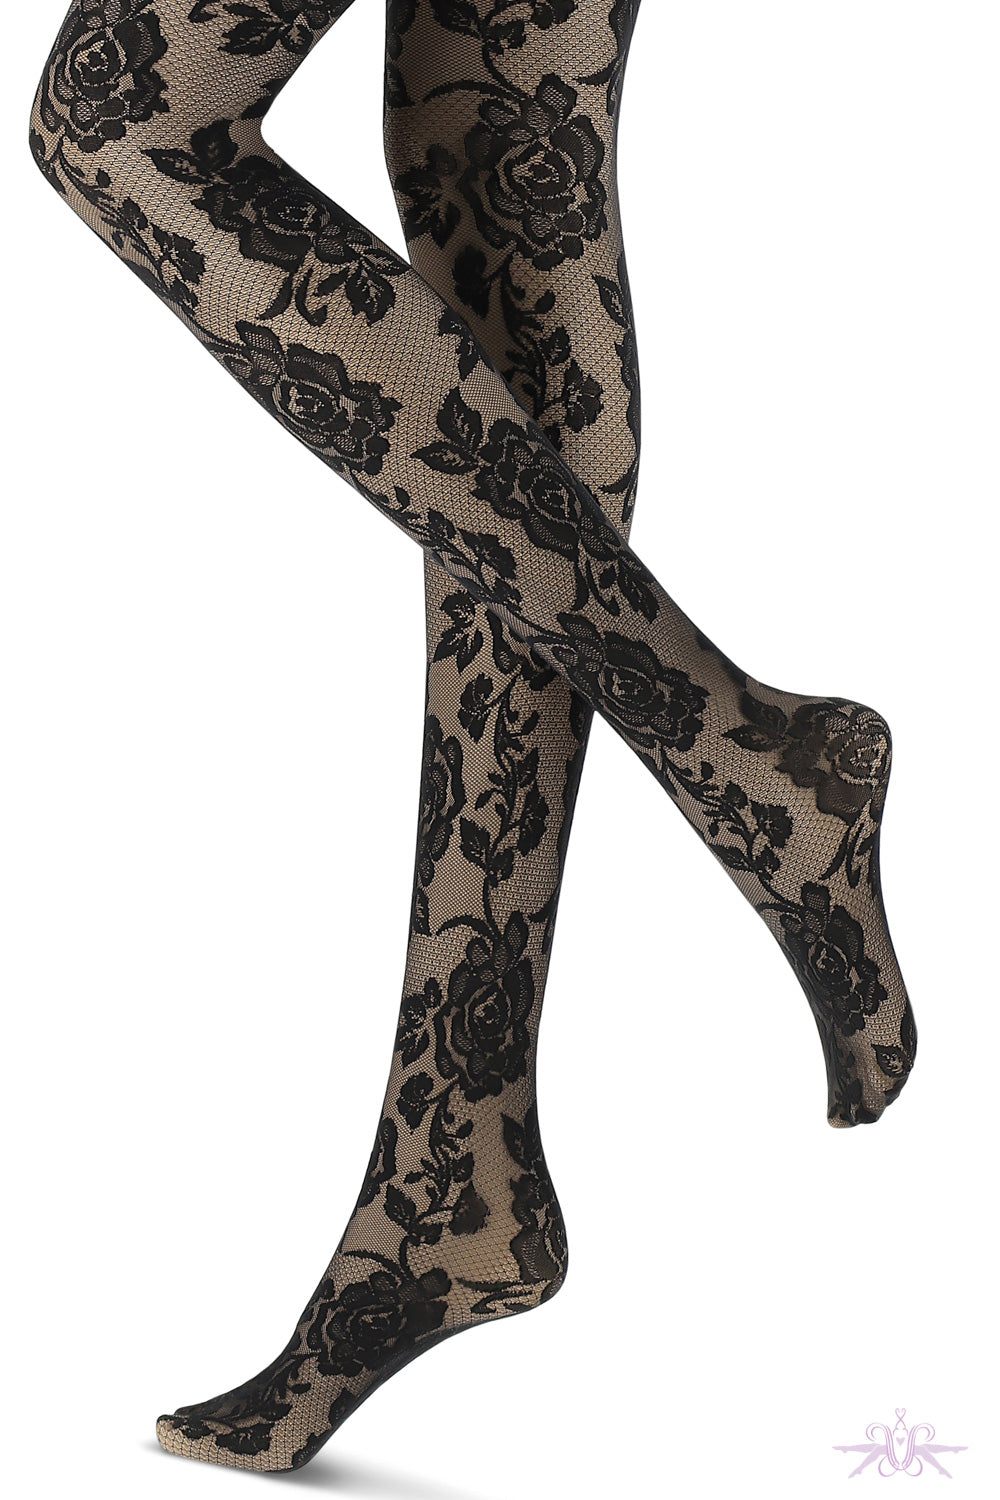 Oroblu Bio Colour Floral Lace Tights - Mayfair Stockings Fashion Tights